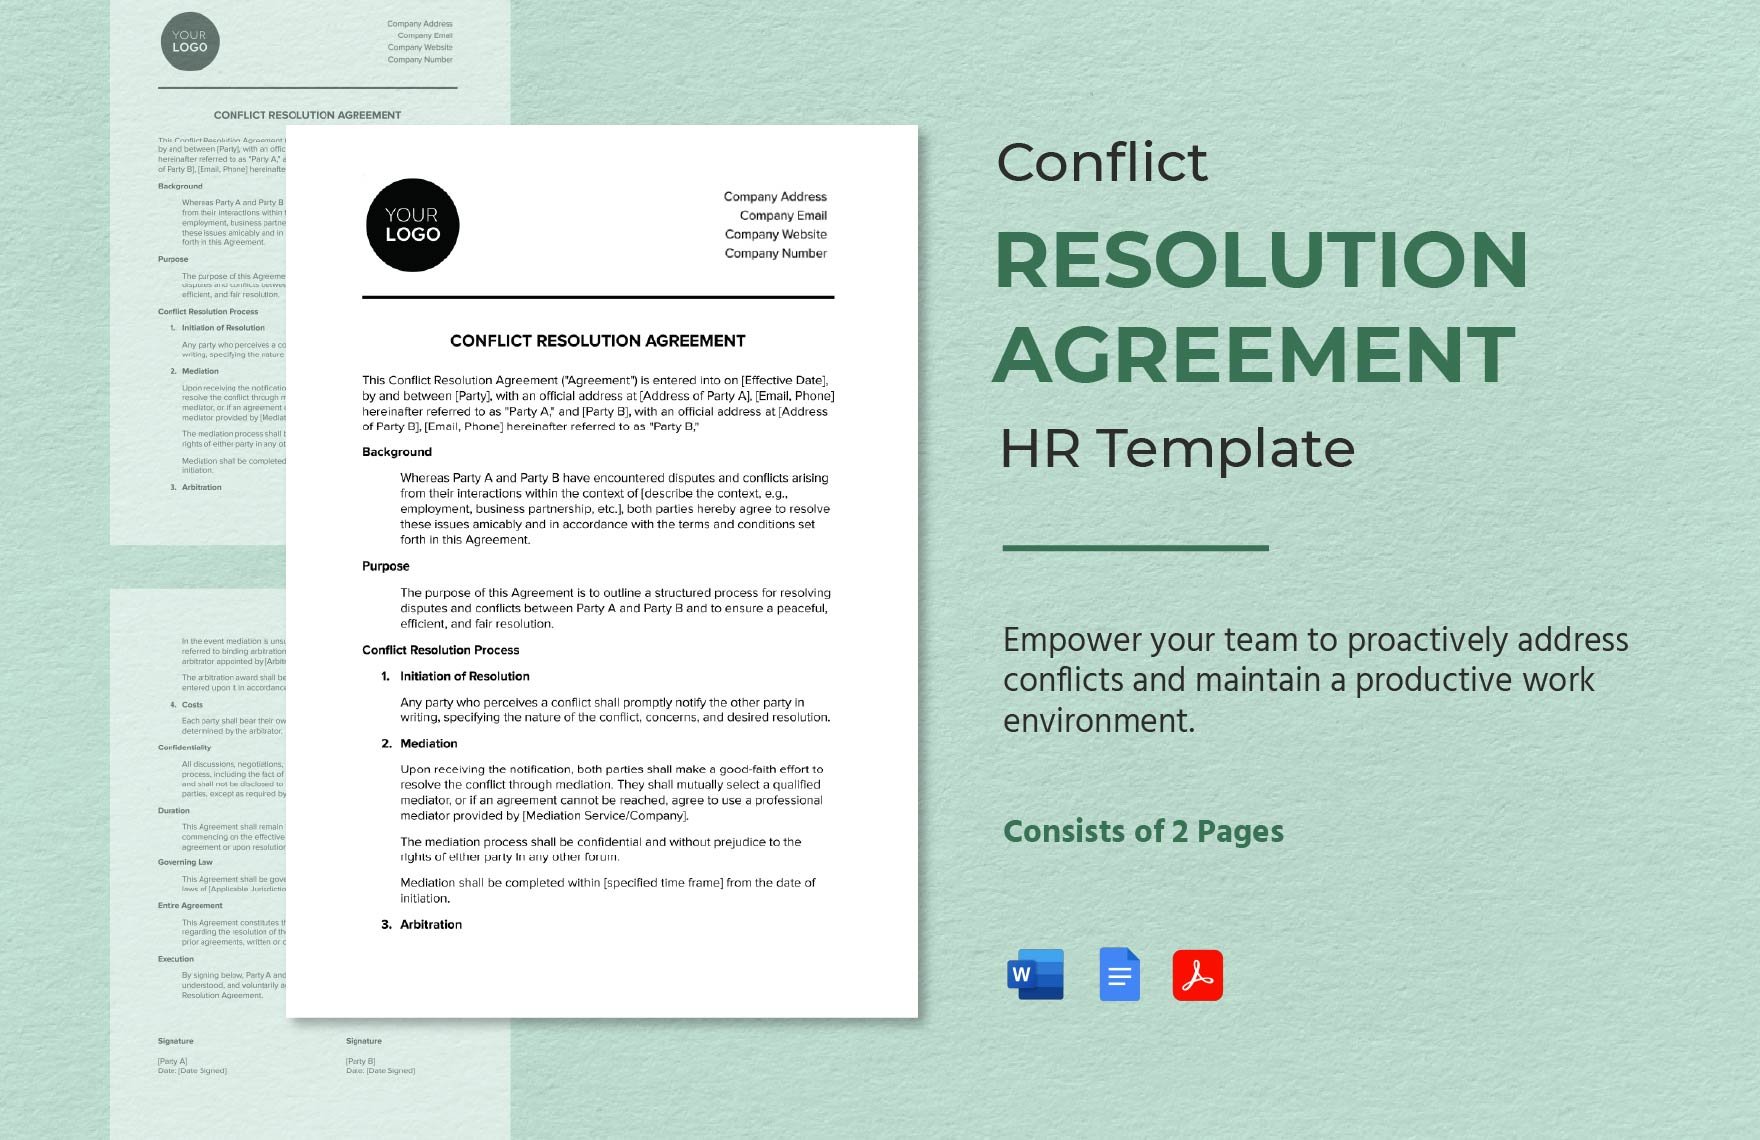 Conflict Resolution Agreement HR Template